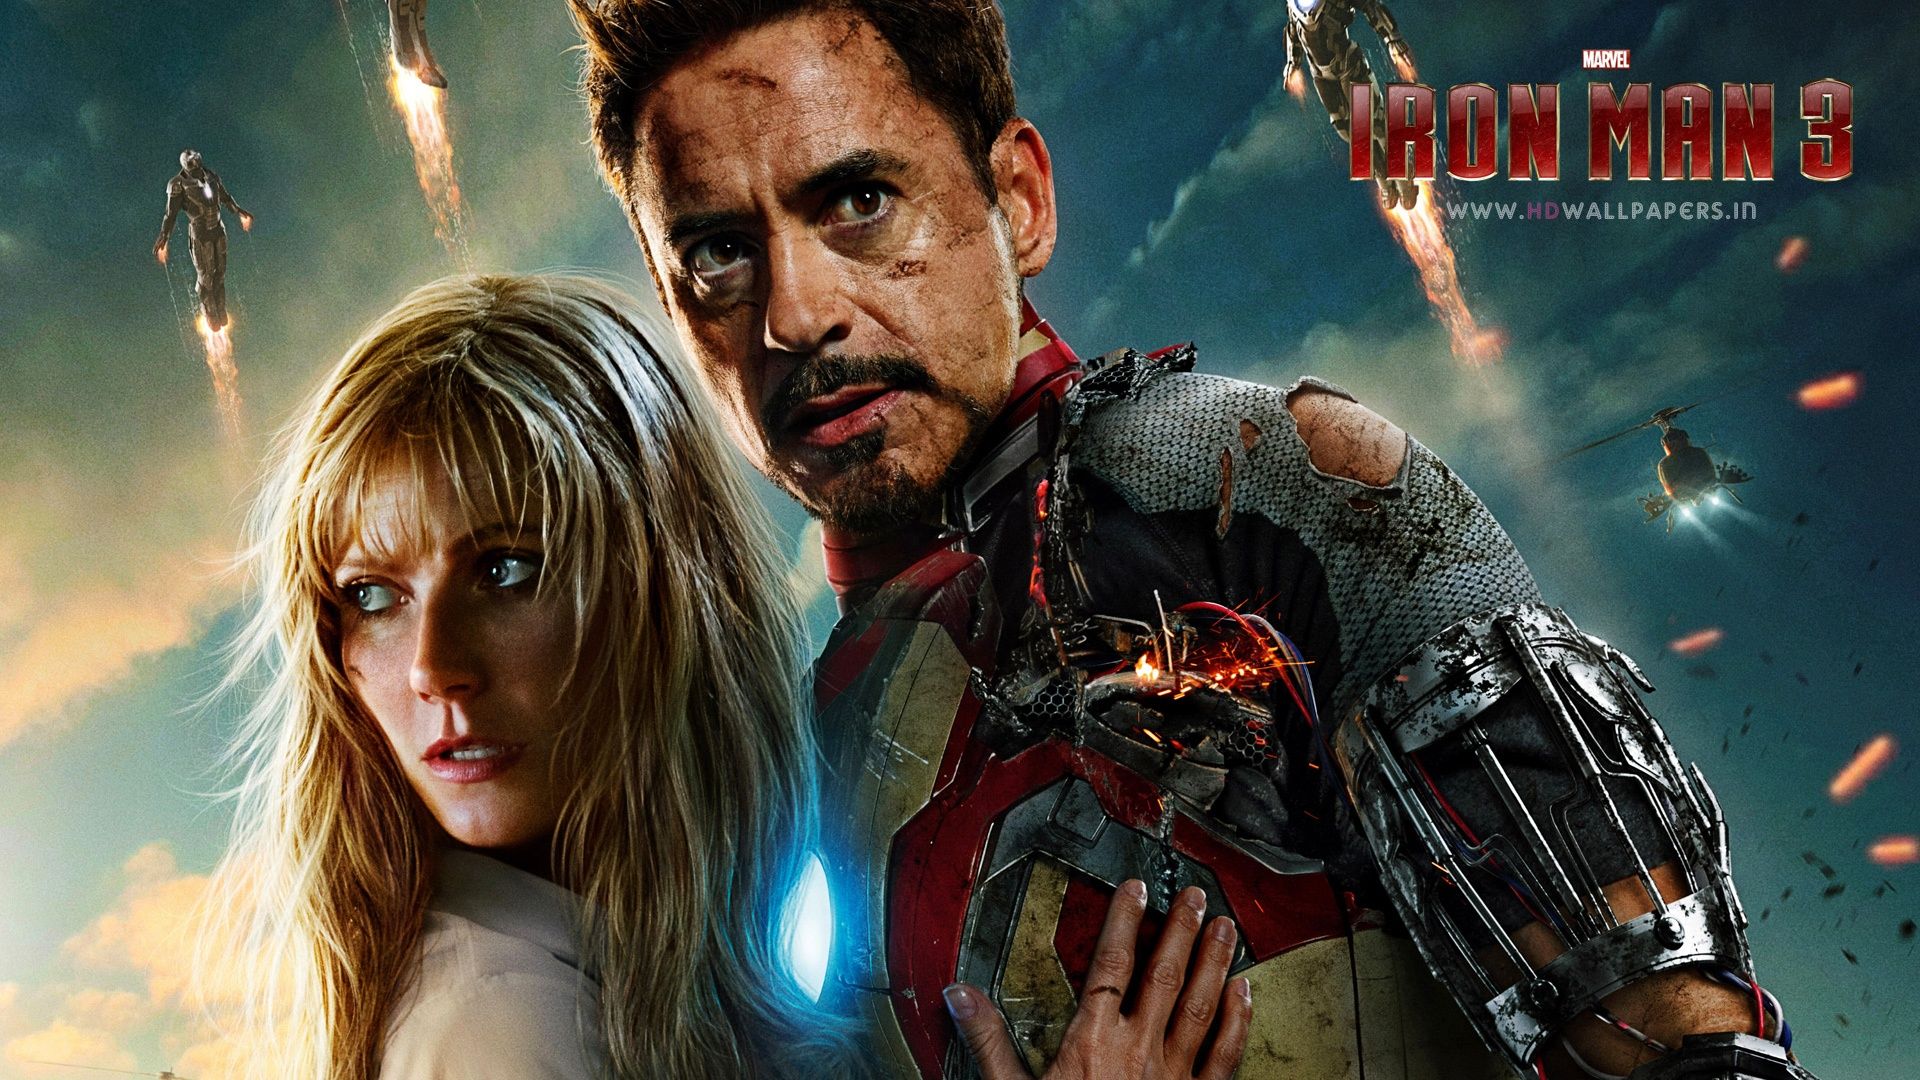 Iron Man 3 2013 Movie Wallpaper in jpg format for free download